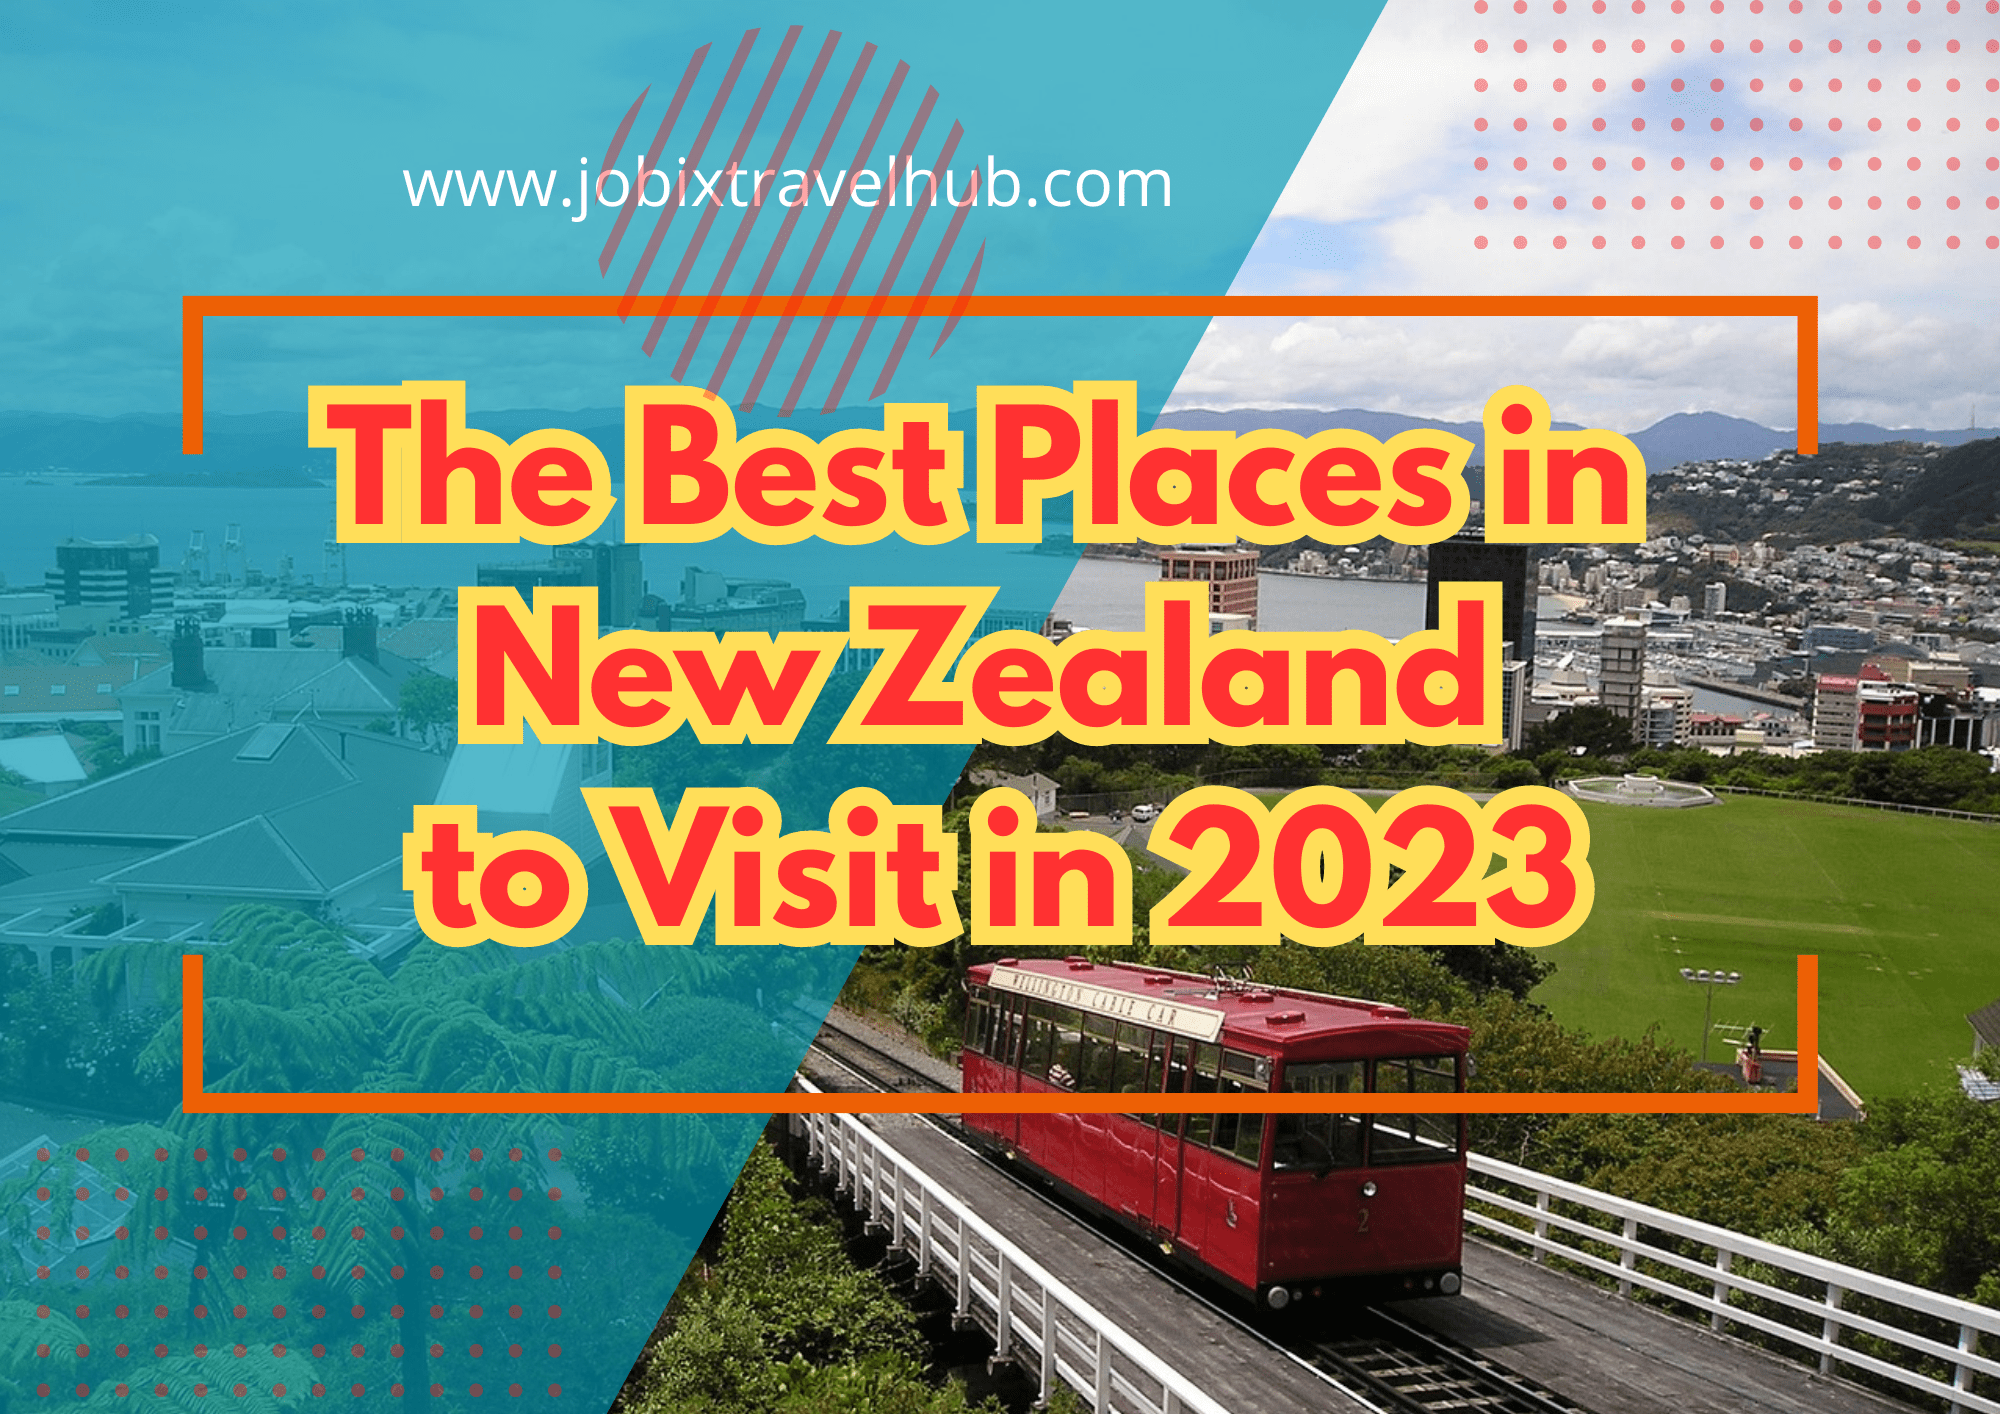 The Best Places in New Zealand to Visit in 2023